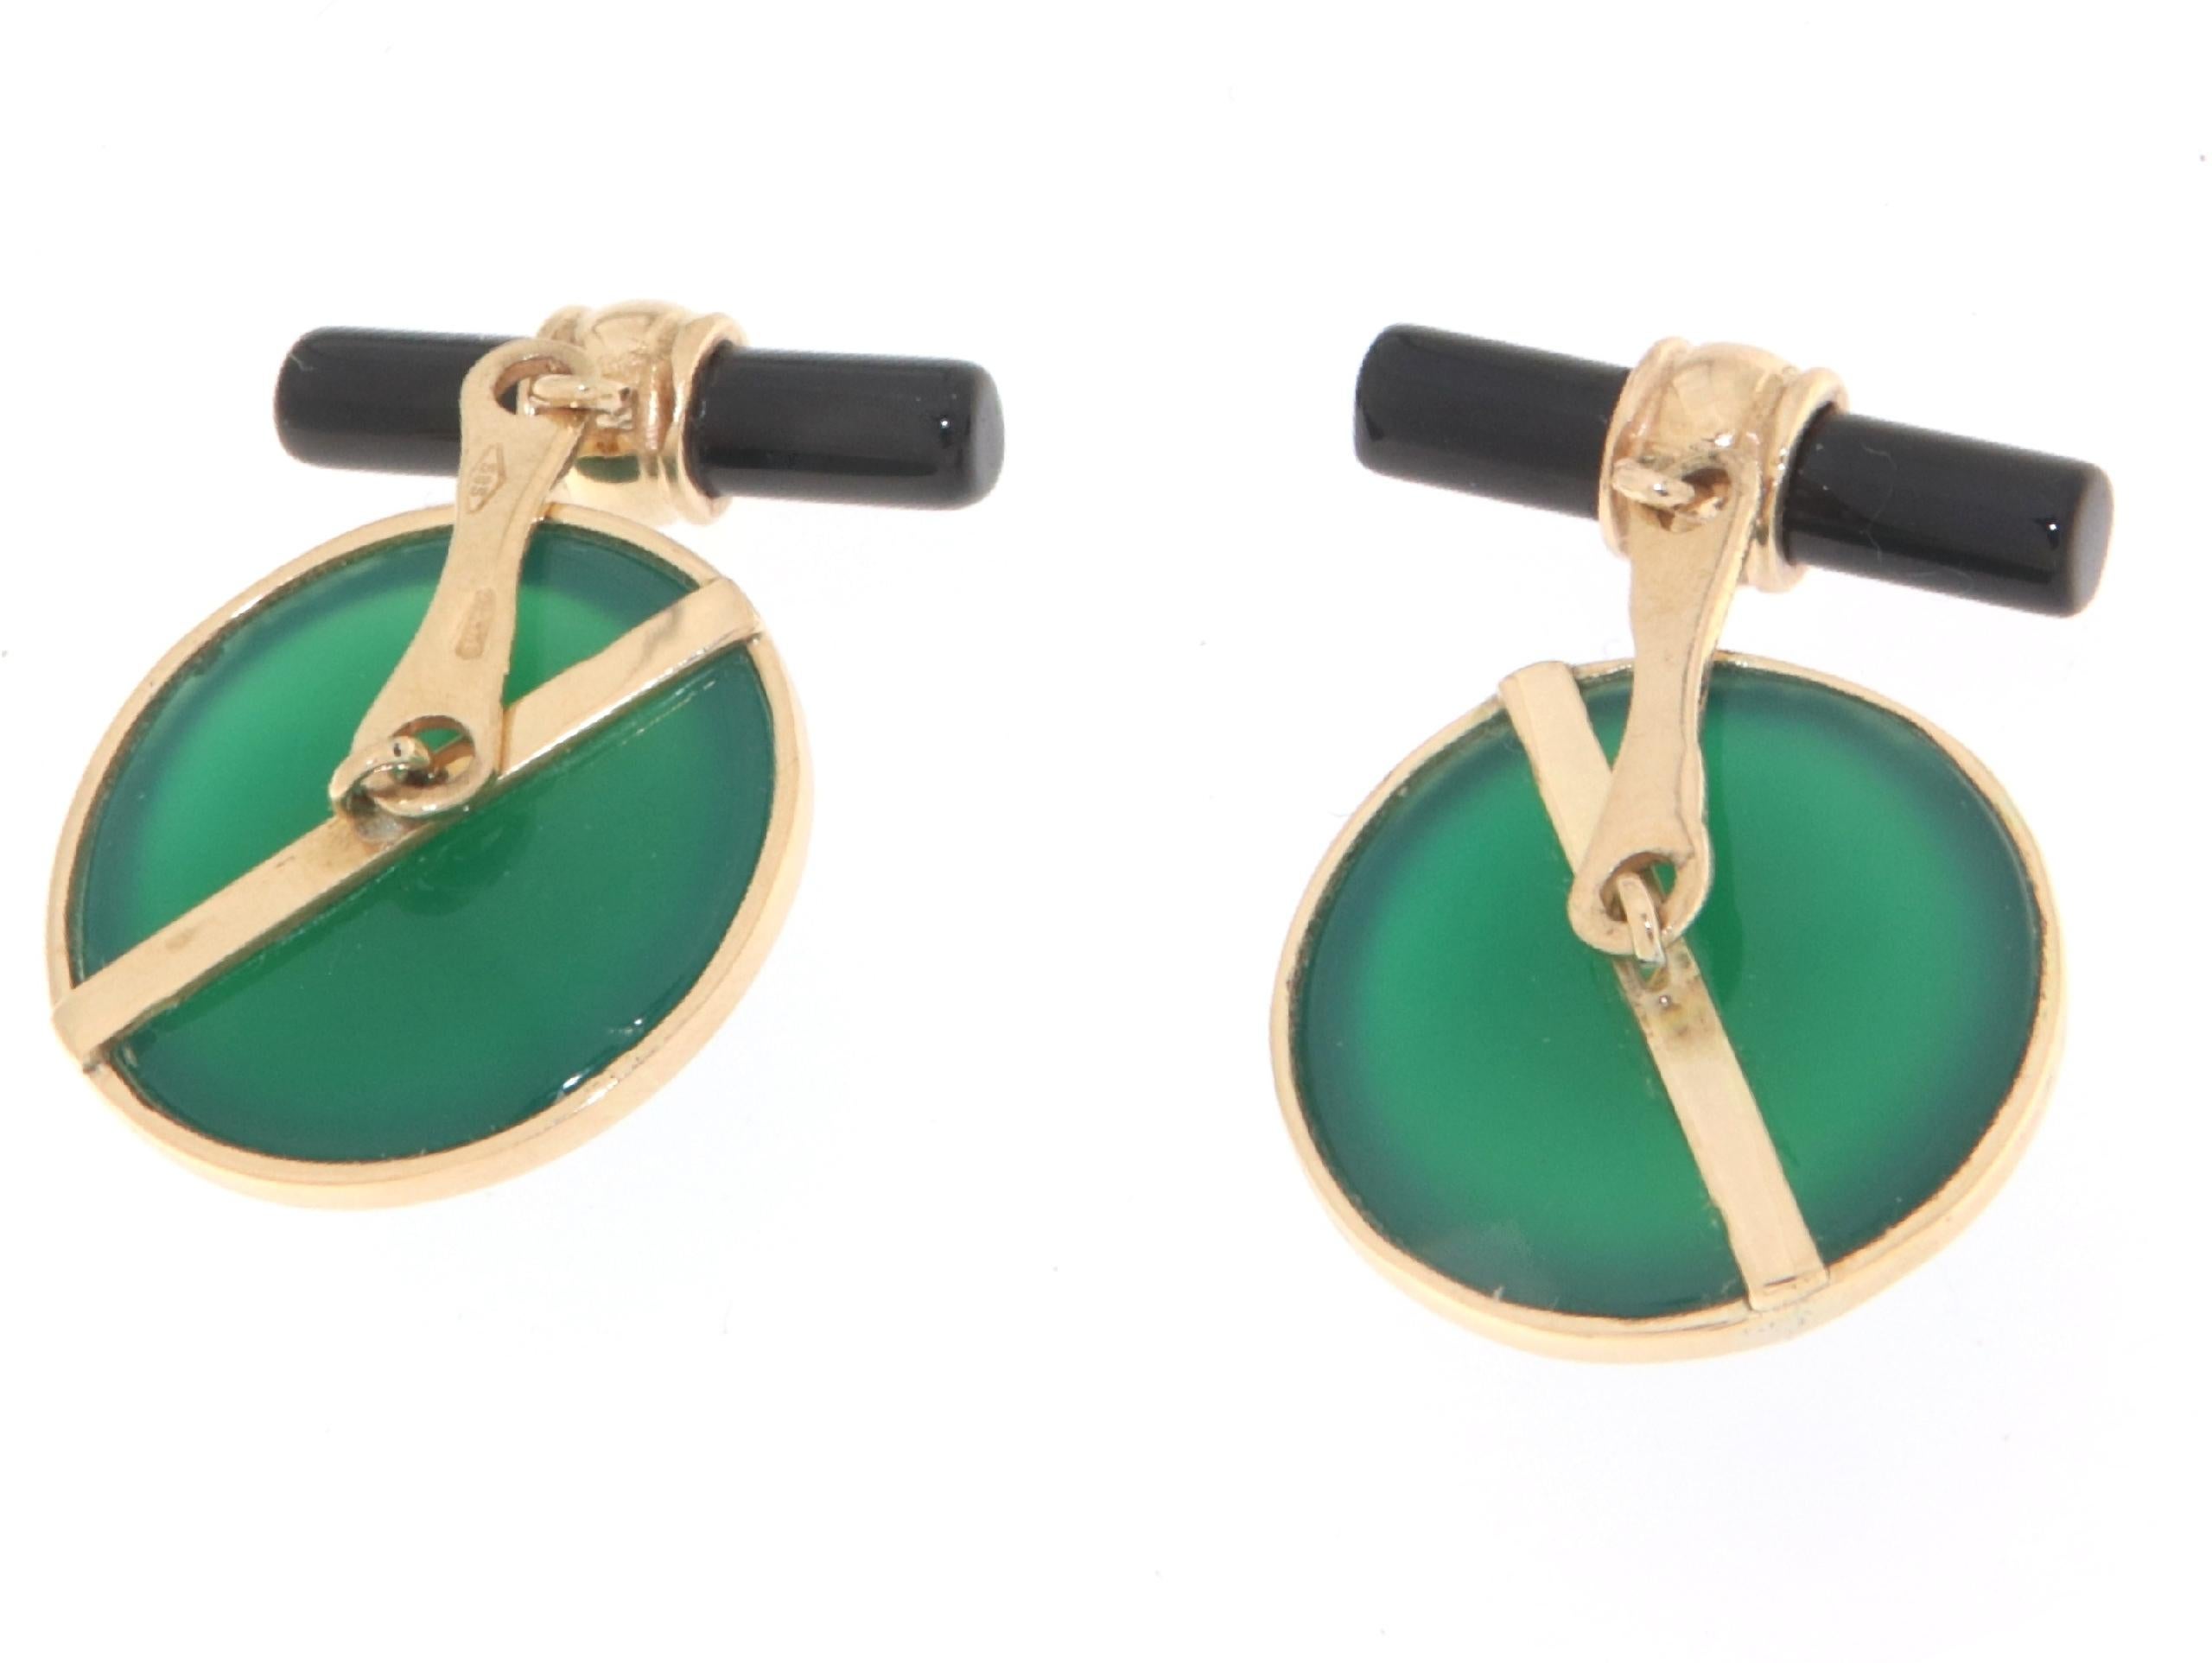 Handcraft Green Agate 14 Karats Yellow Gold Cufflinks In Excellent Condition For Sale In Marcianise, IT